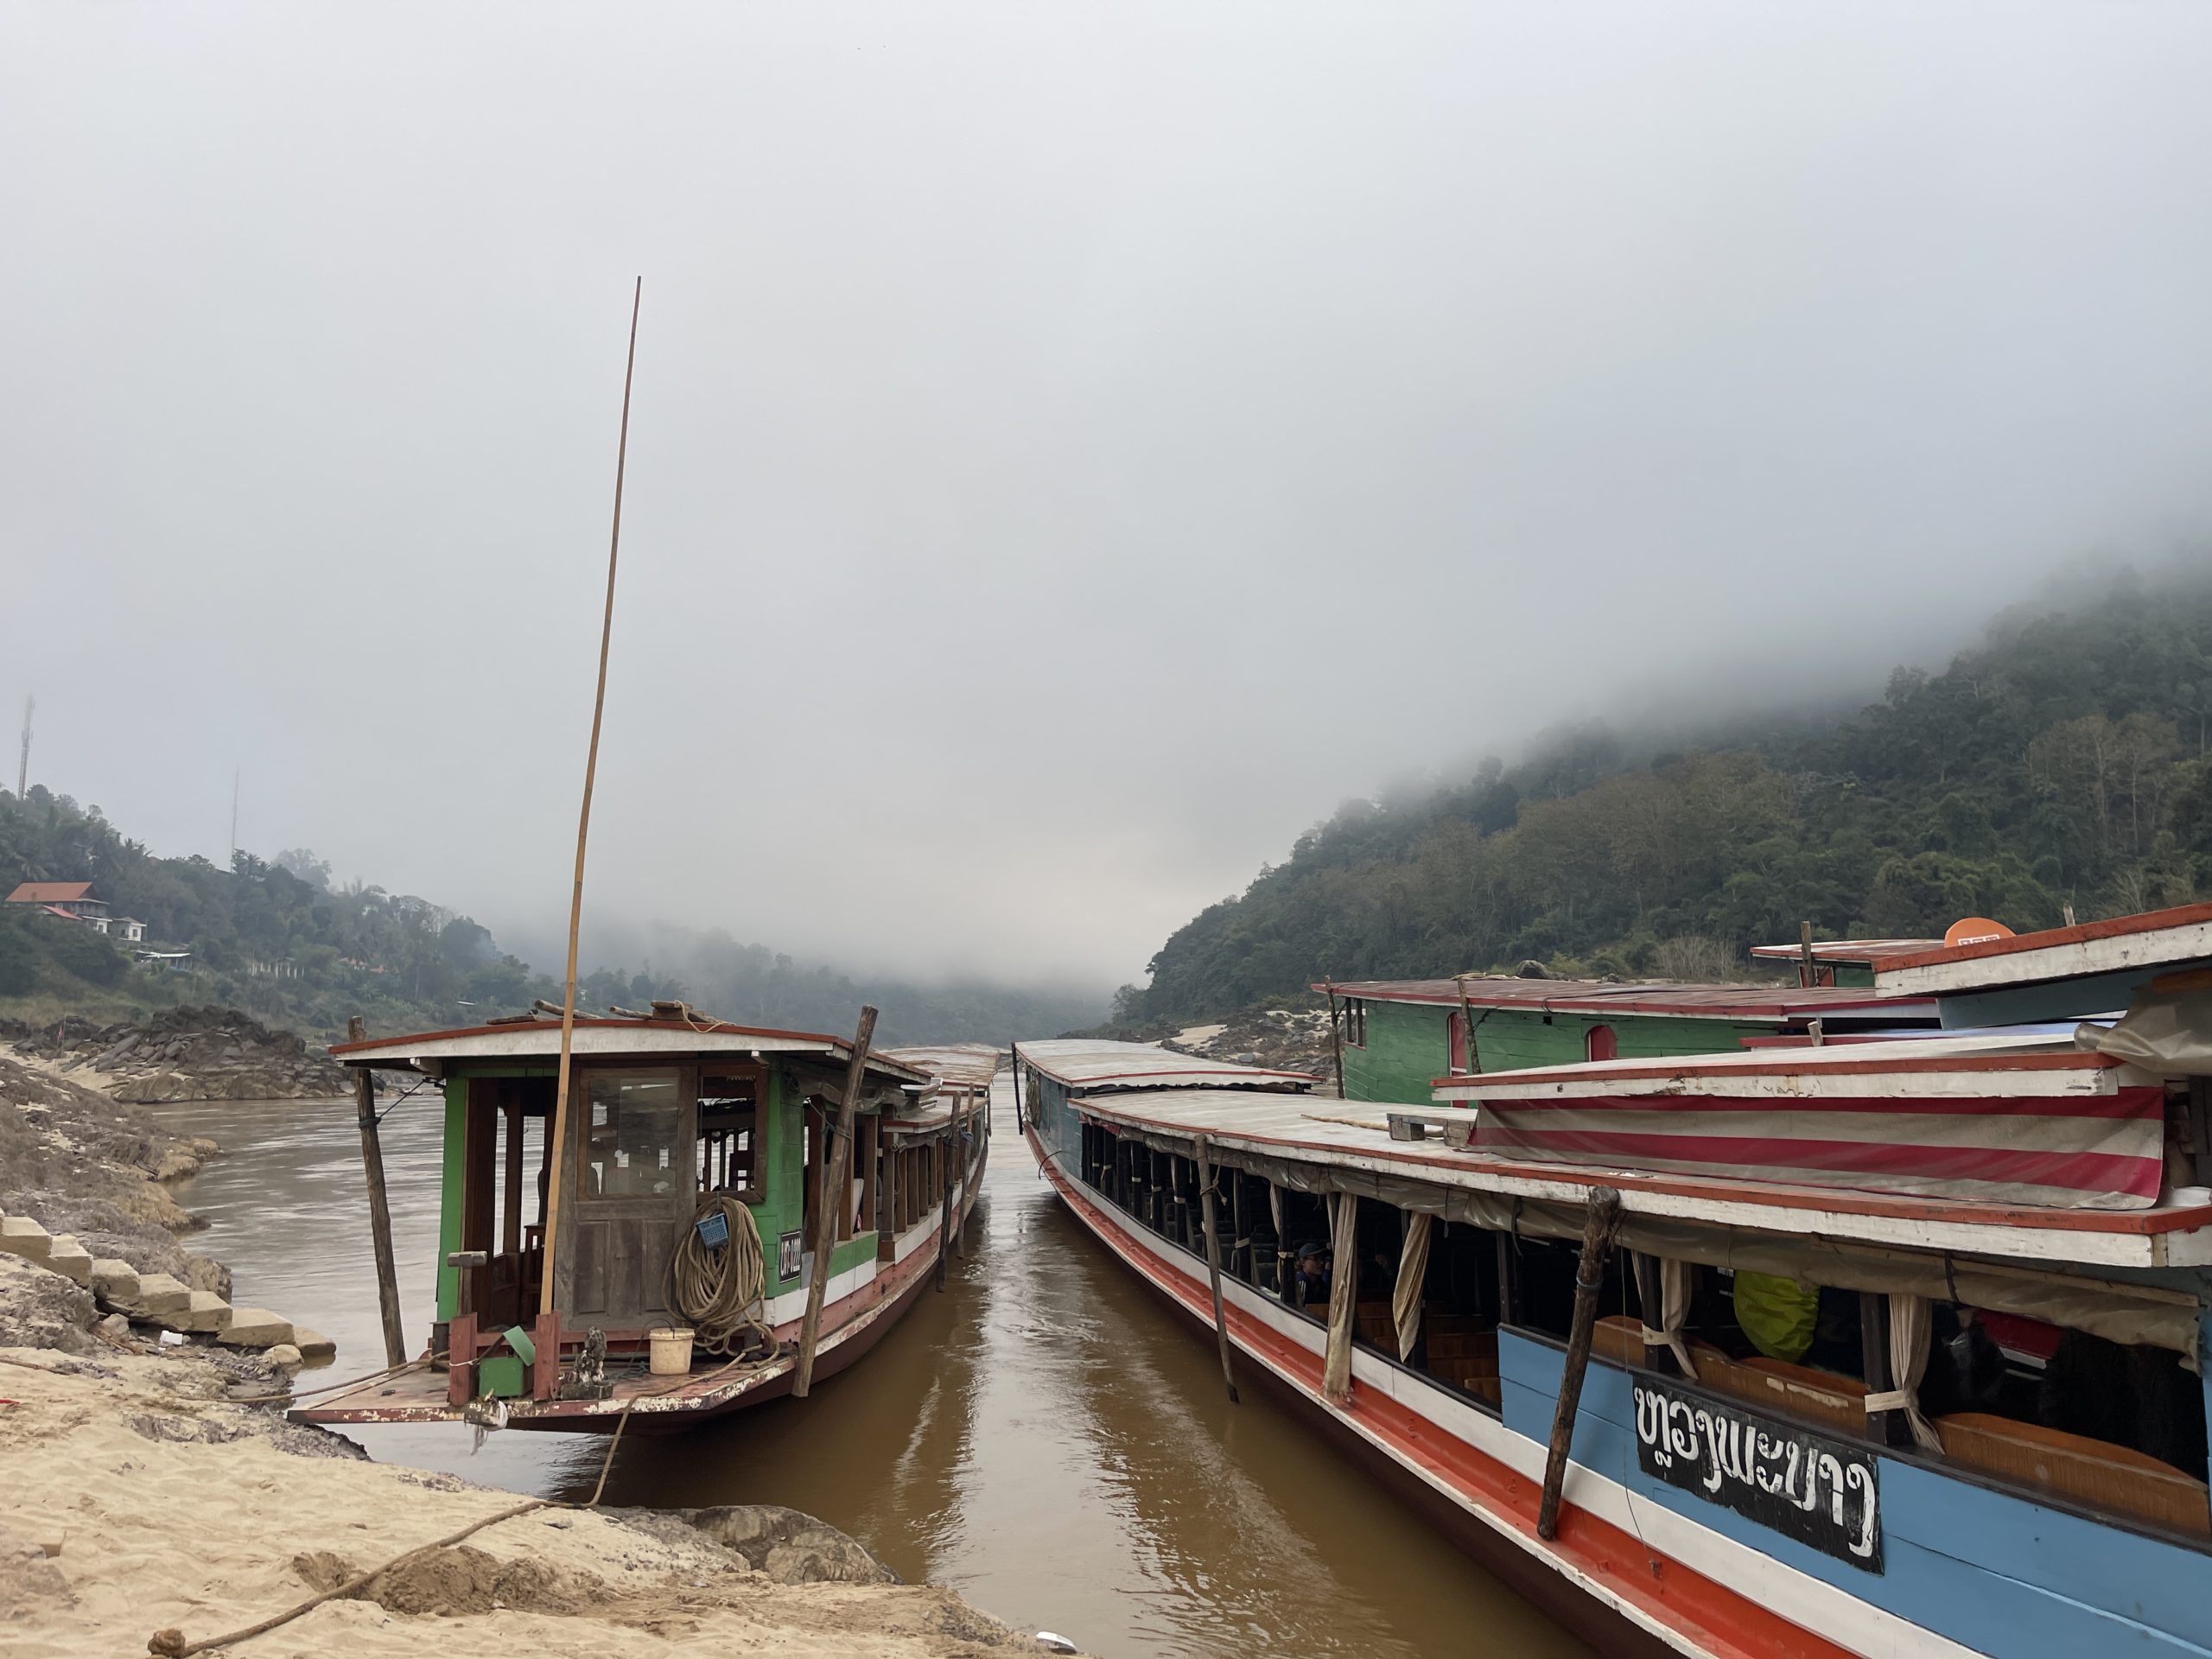 Wooden slow boats surrounded by misty mountains on the Mekong River.